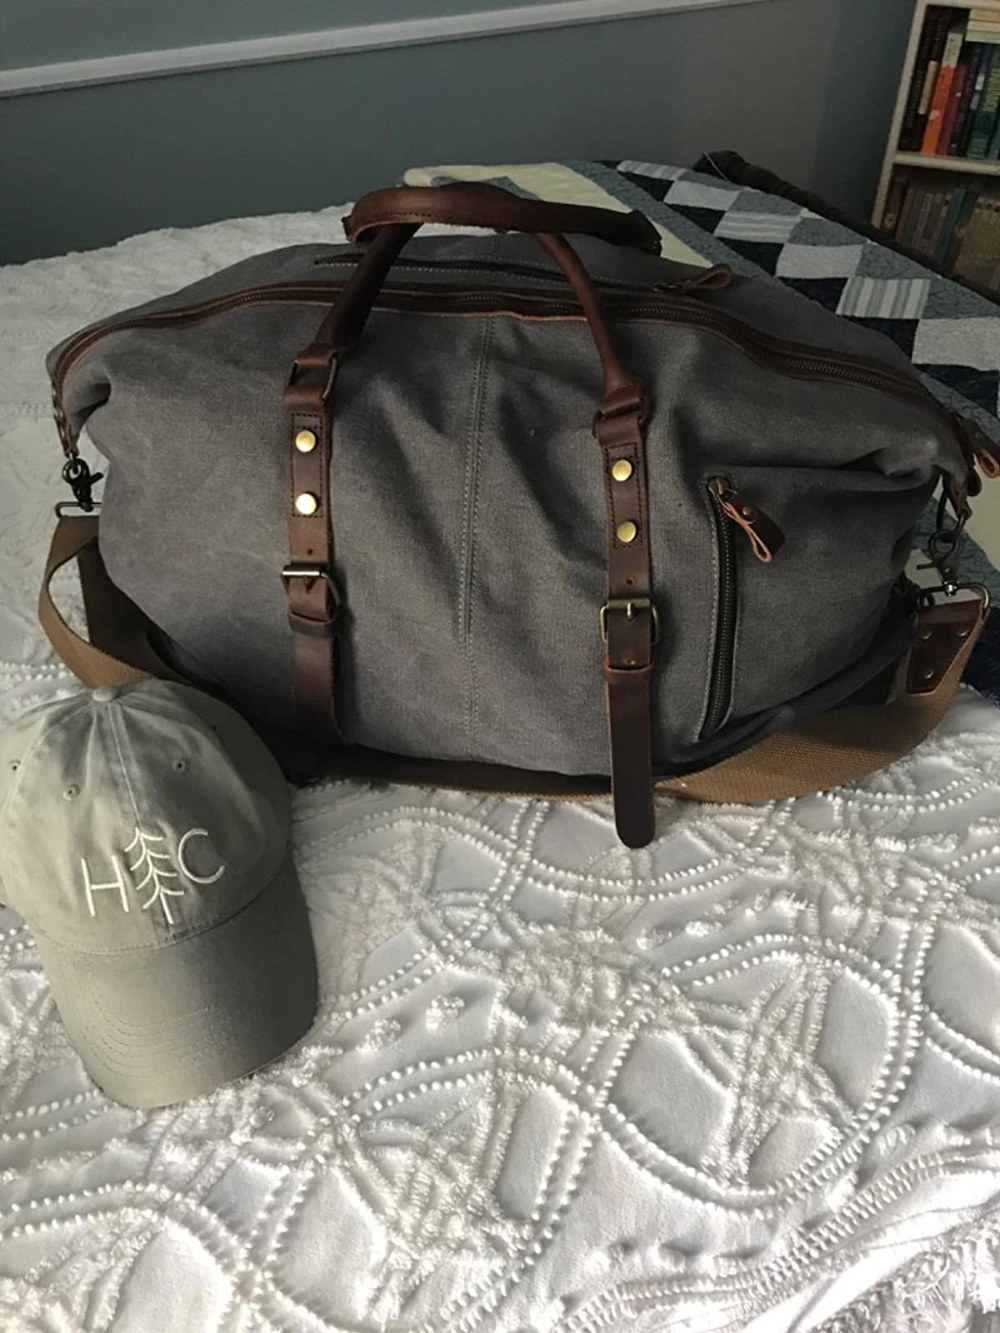 The duffel in the color Gray